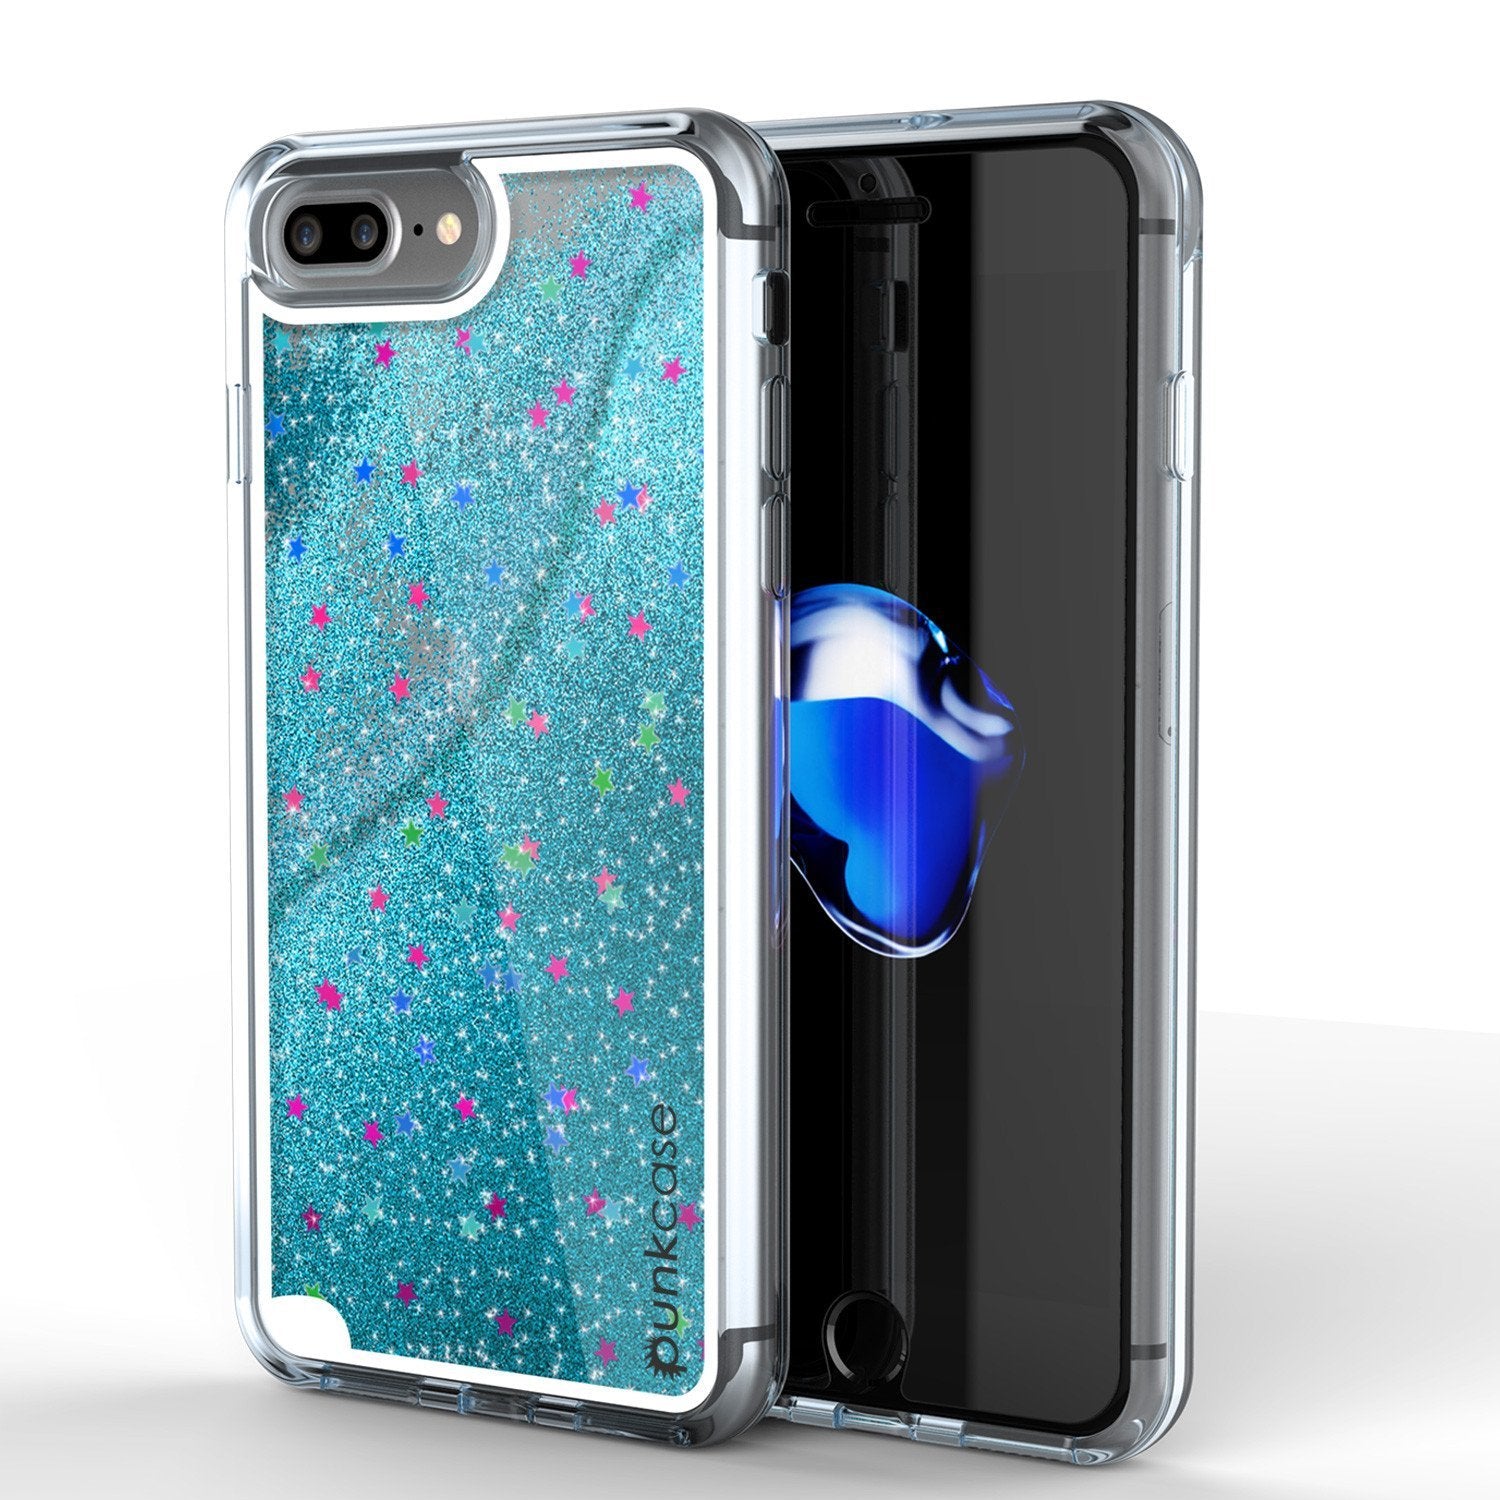 iPhone 8+ Plus Case, PunkCase LIQUID Teal Series, Protective Dual Layer Floating Glitter Cover